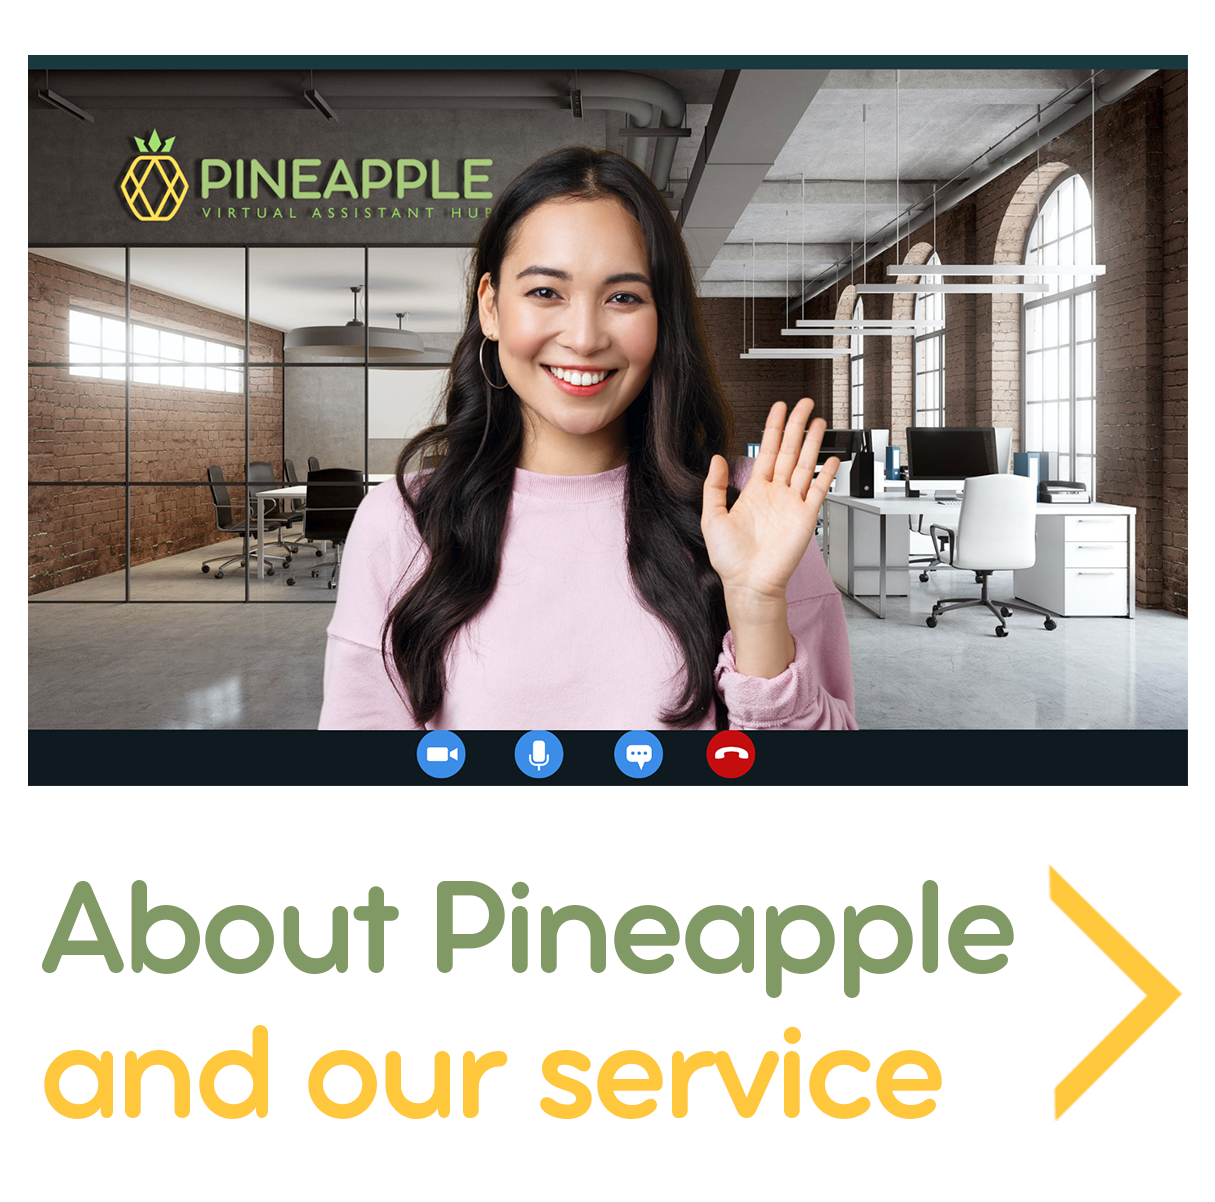 About Pineapple and our service